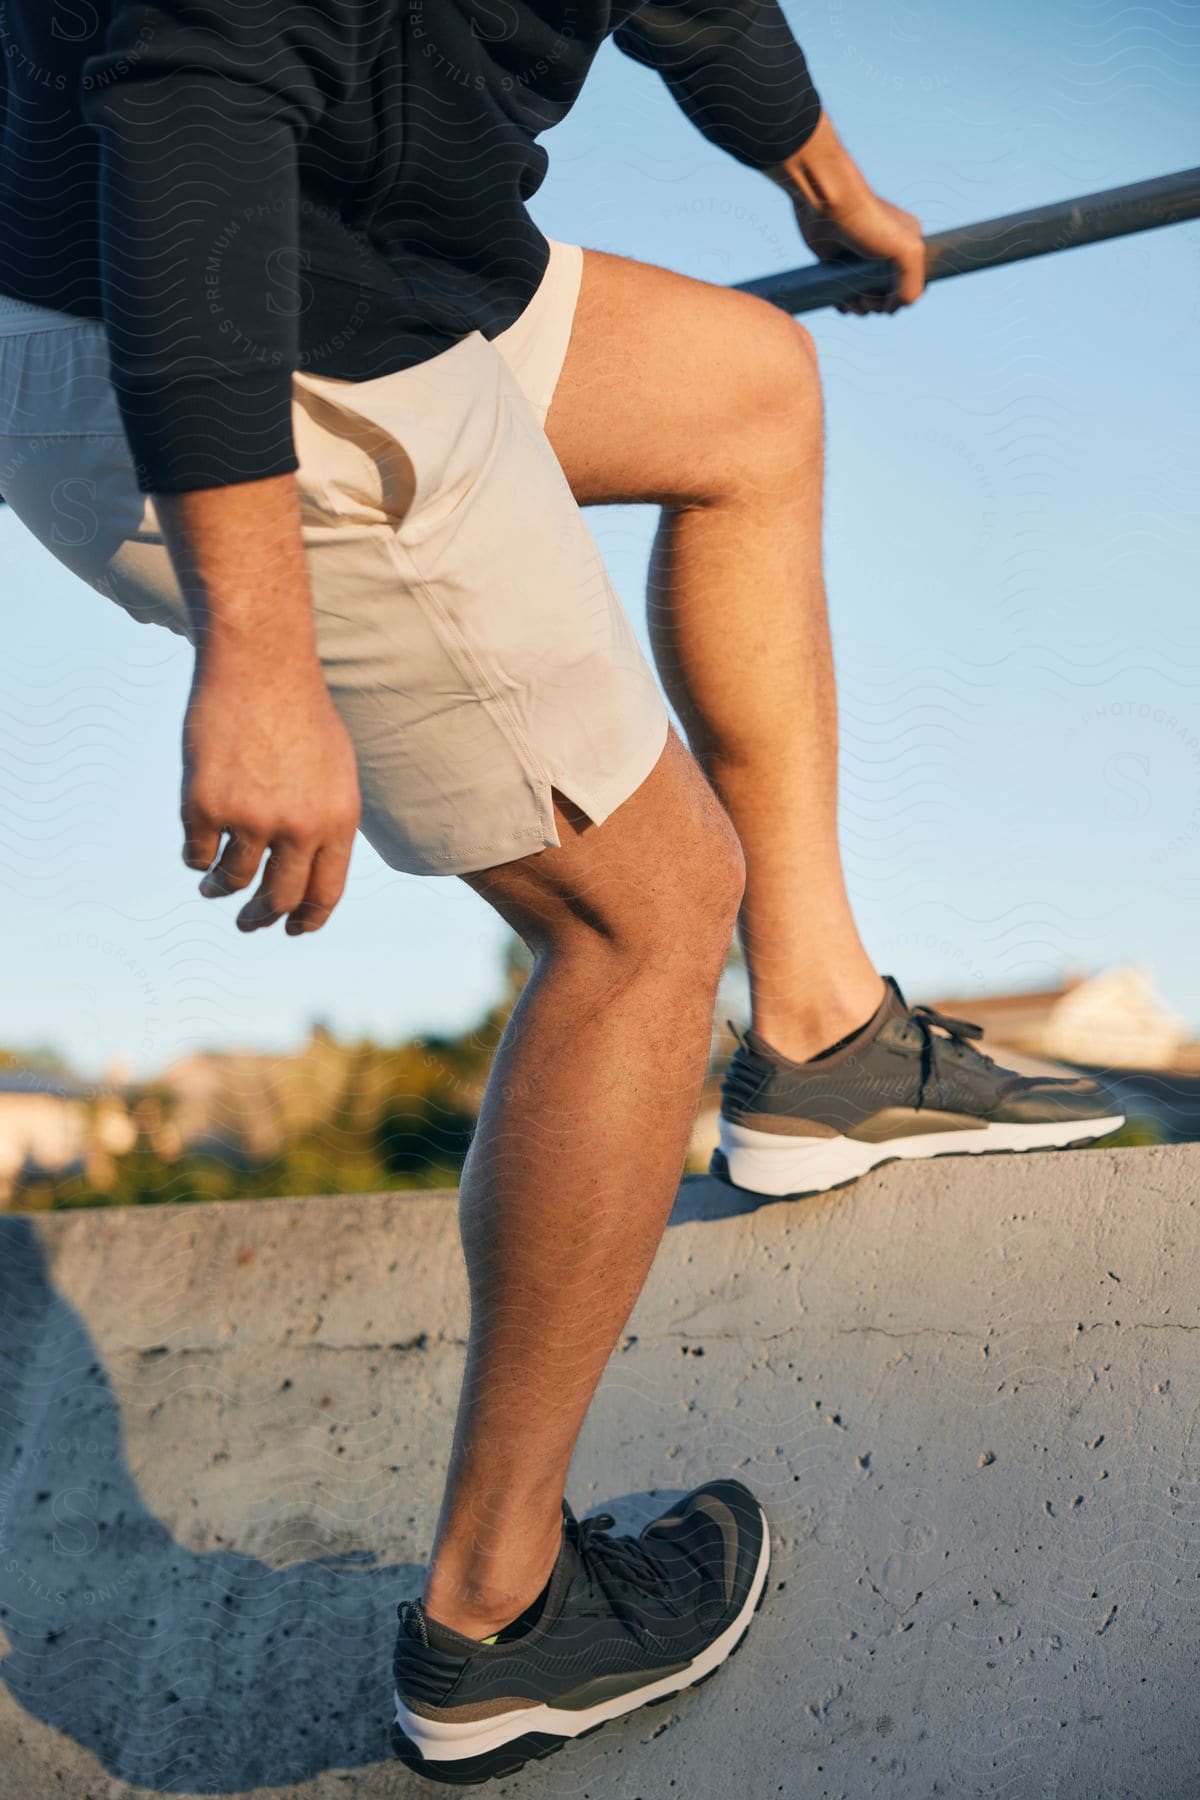 A man wearing shorts and sneakers posed at the top of a ramp holding a railing